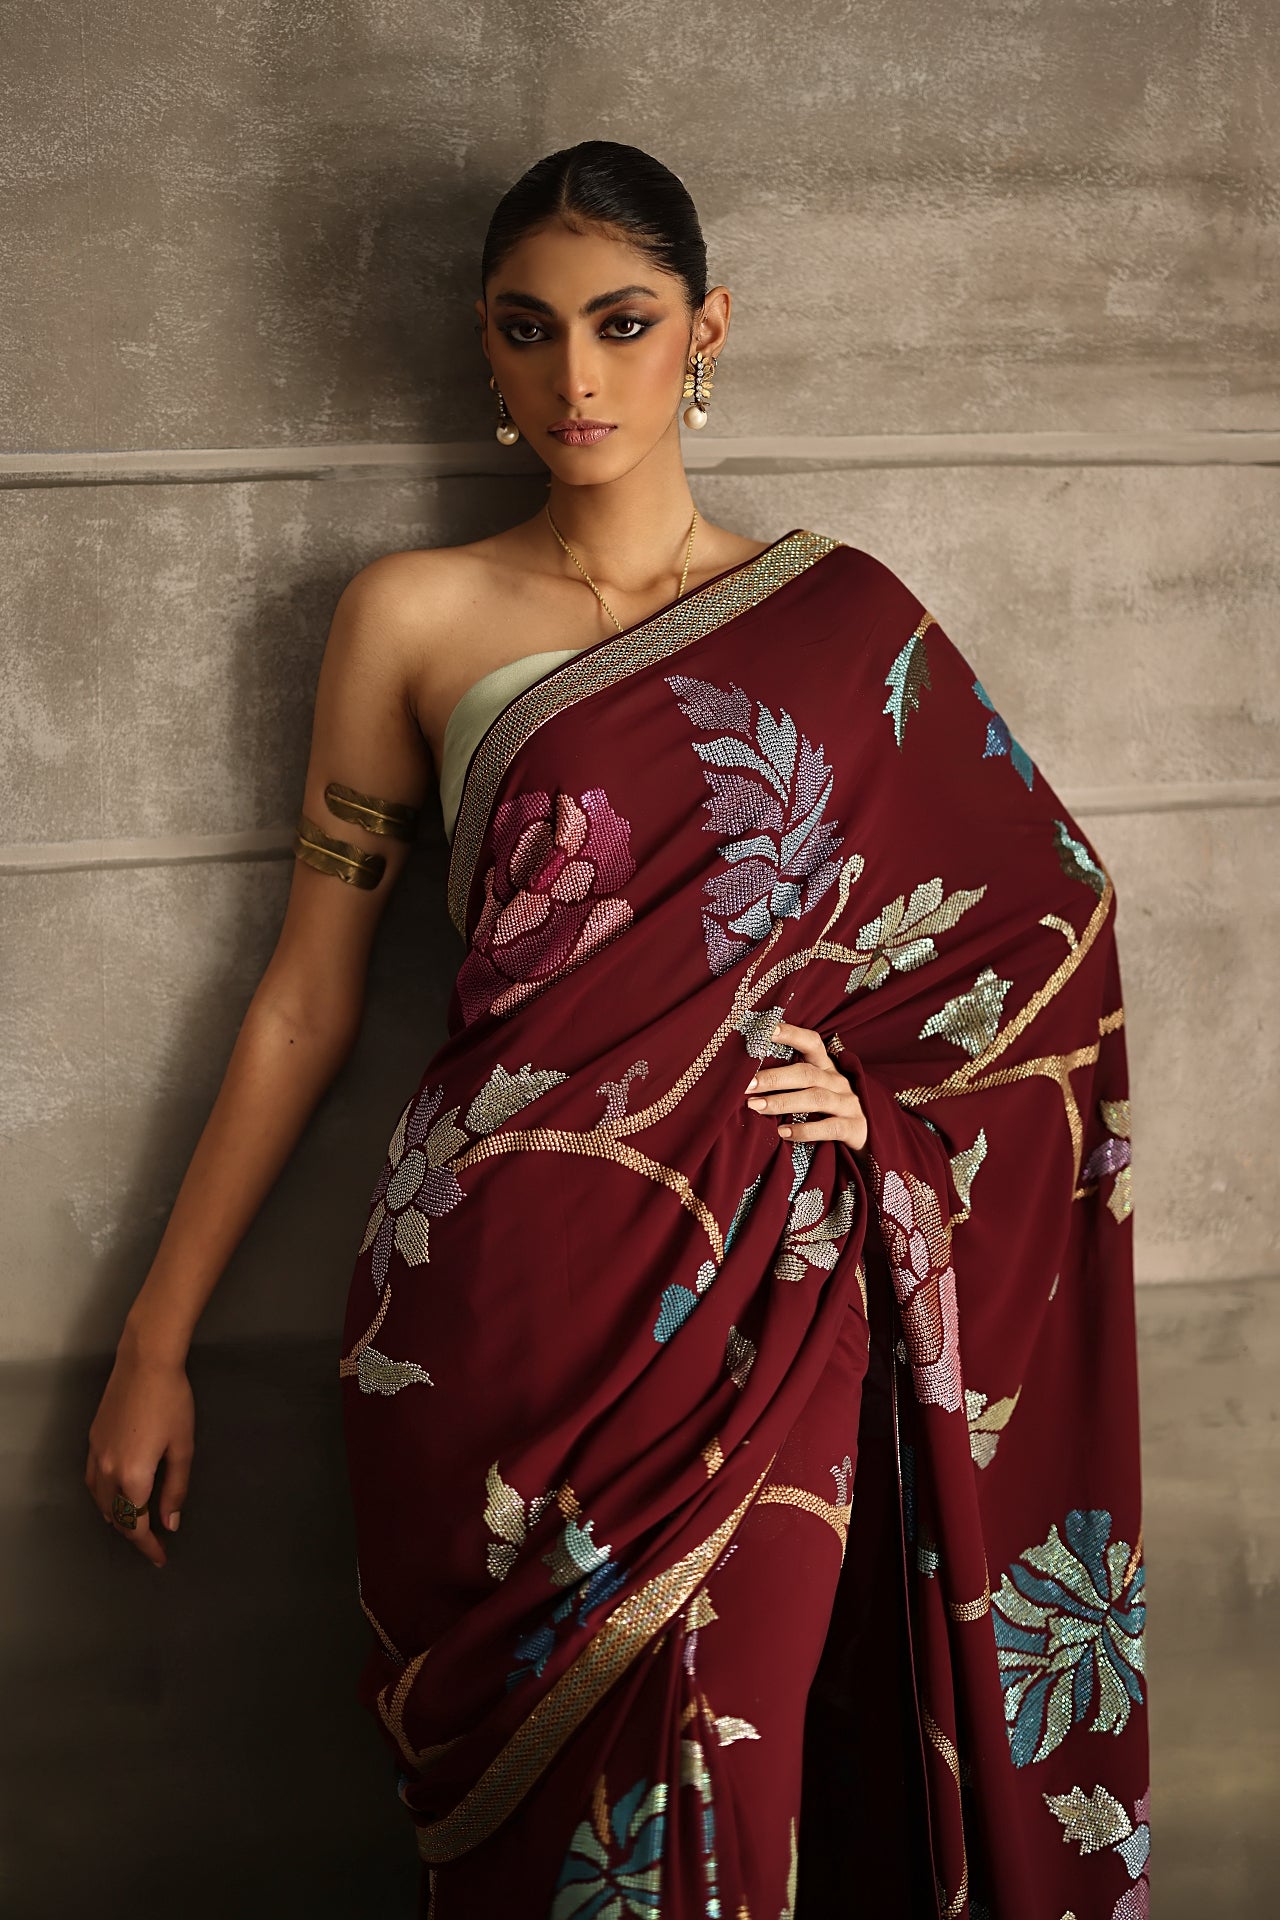 Aafrinish By Niazi Eshal Rahman Rizwan Ul Haq Deep Wine Cutdaana & Sequins Saree the rich hues of our deep wine Chiffon saree intricately detailed with floral motifs in glimmering sequins Pakistan Fashion